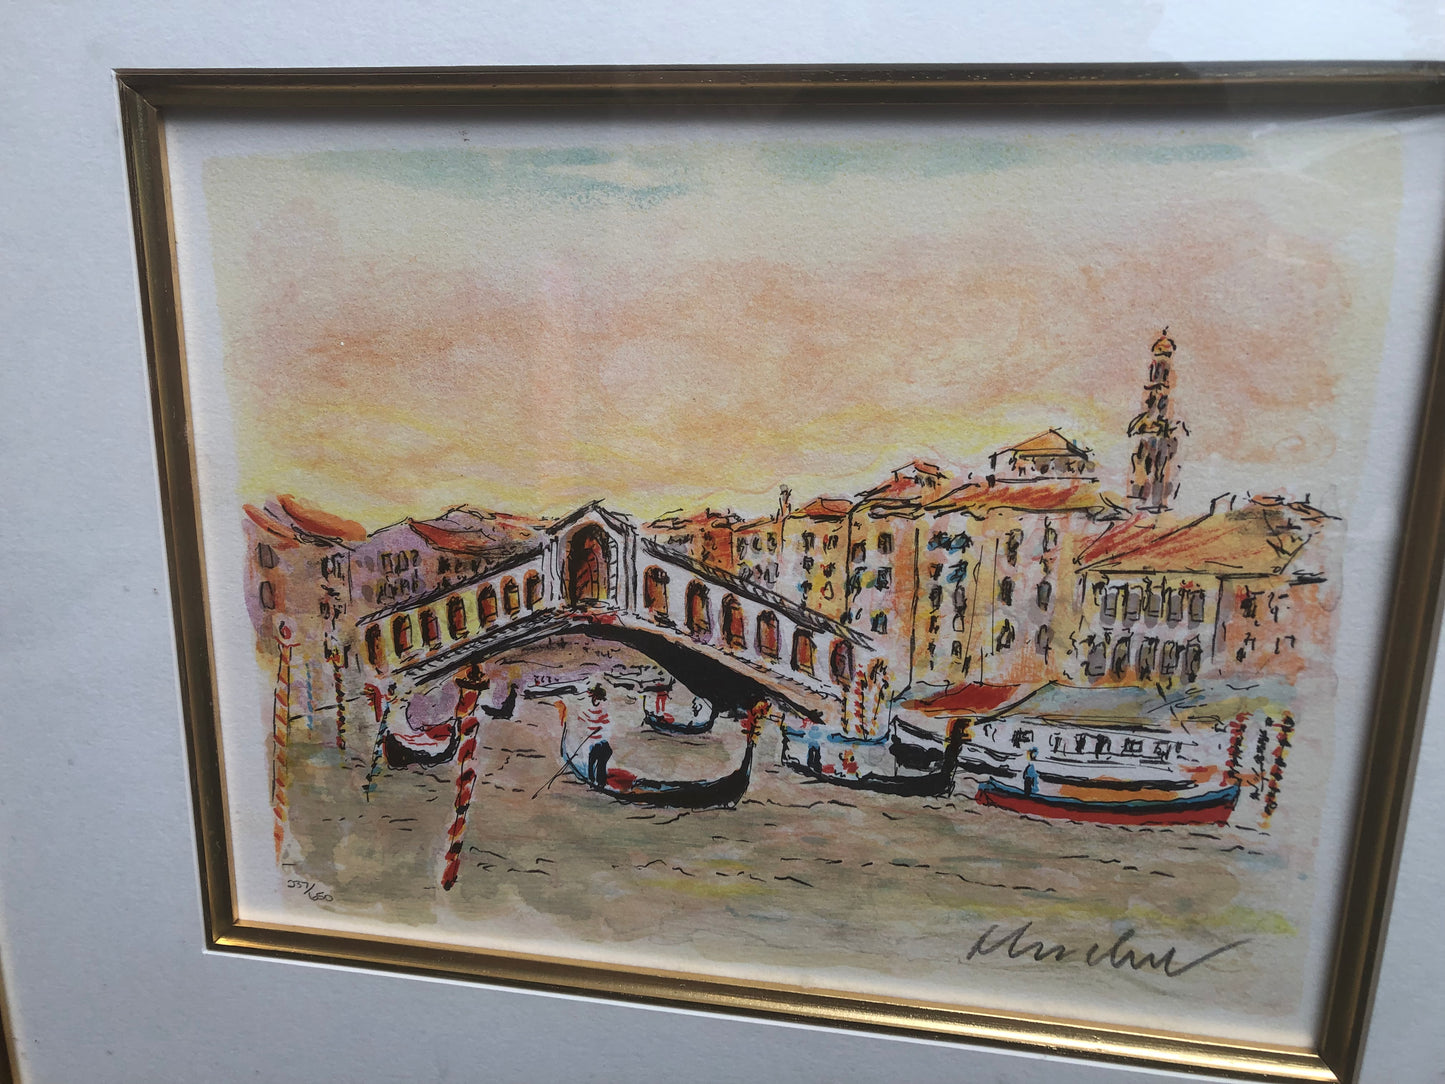 Stunning Venice Lithograph signed and Numbered Framed Art - Pristine!